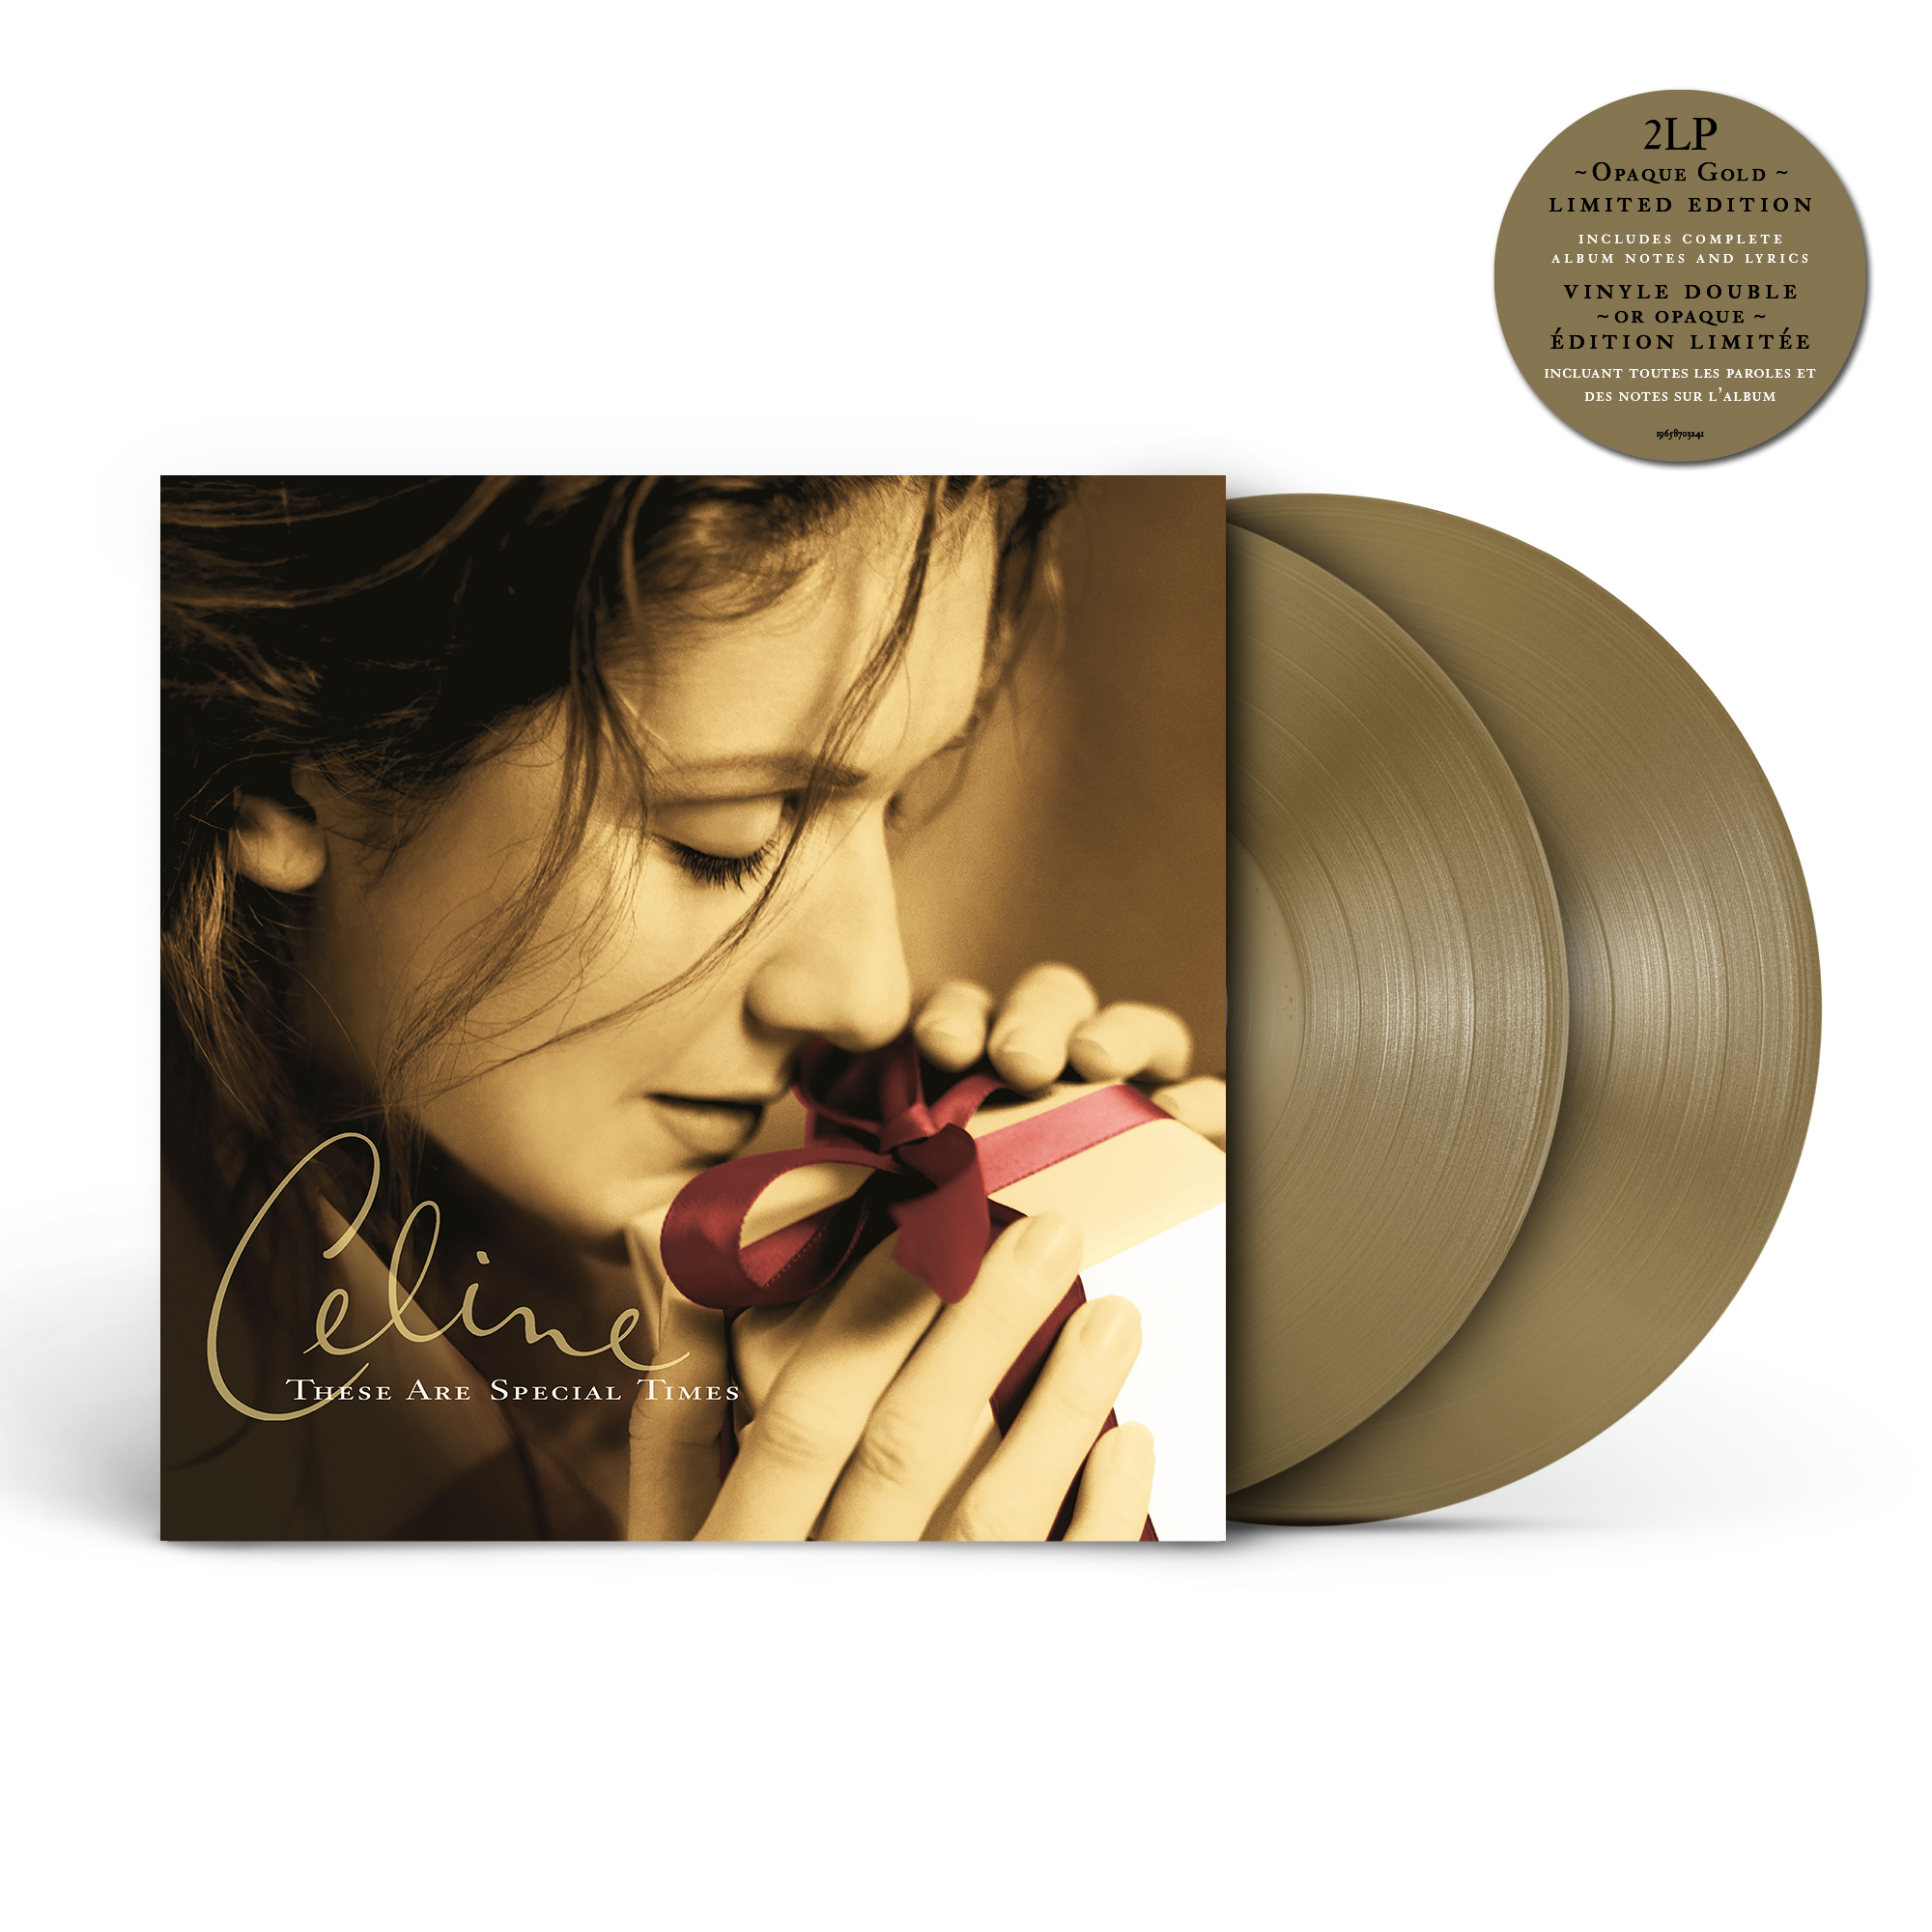 Celine Dion on X: Get-ready-for-Christmas Alert! 😉 🎅 Now available for  preorder: These Are Special Times (Gold Edition) vinyl will be released on  November 11! This new edition includes “I Met an